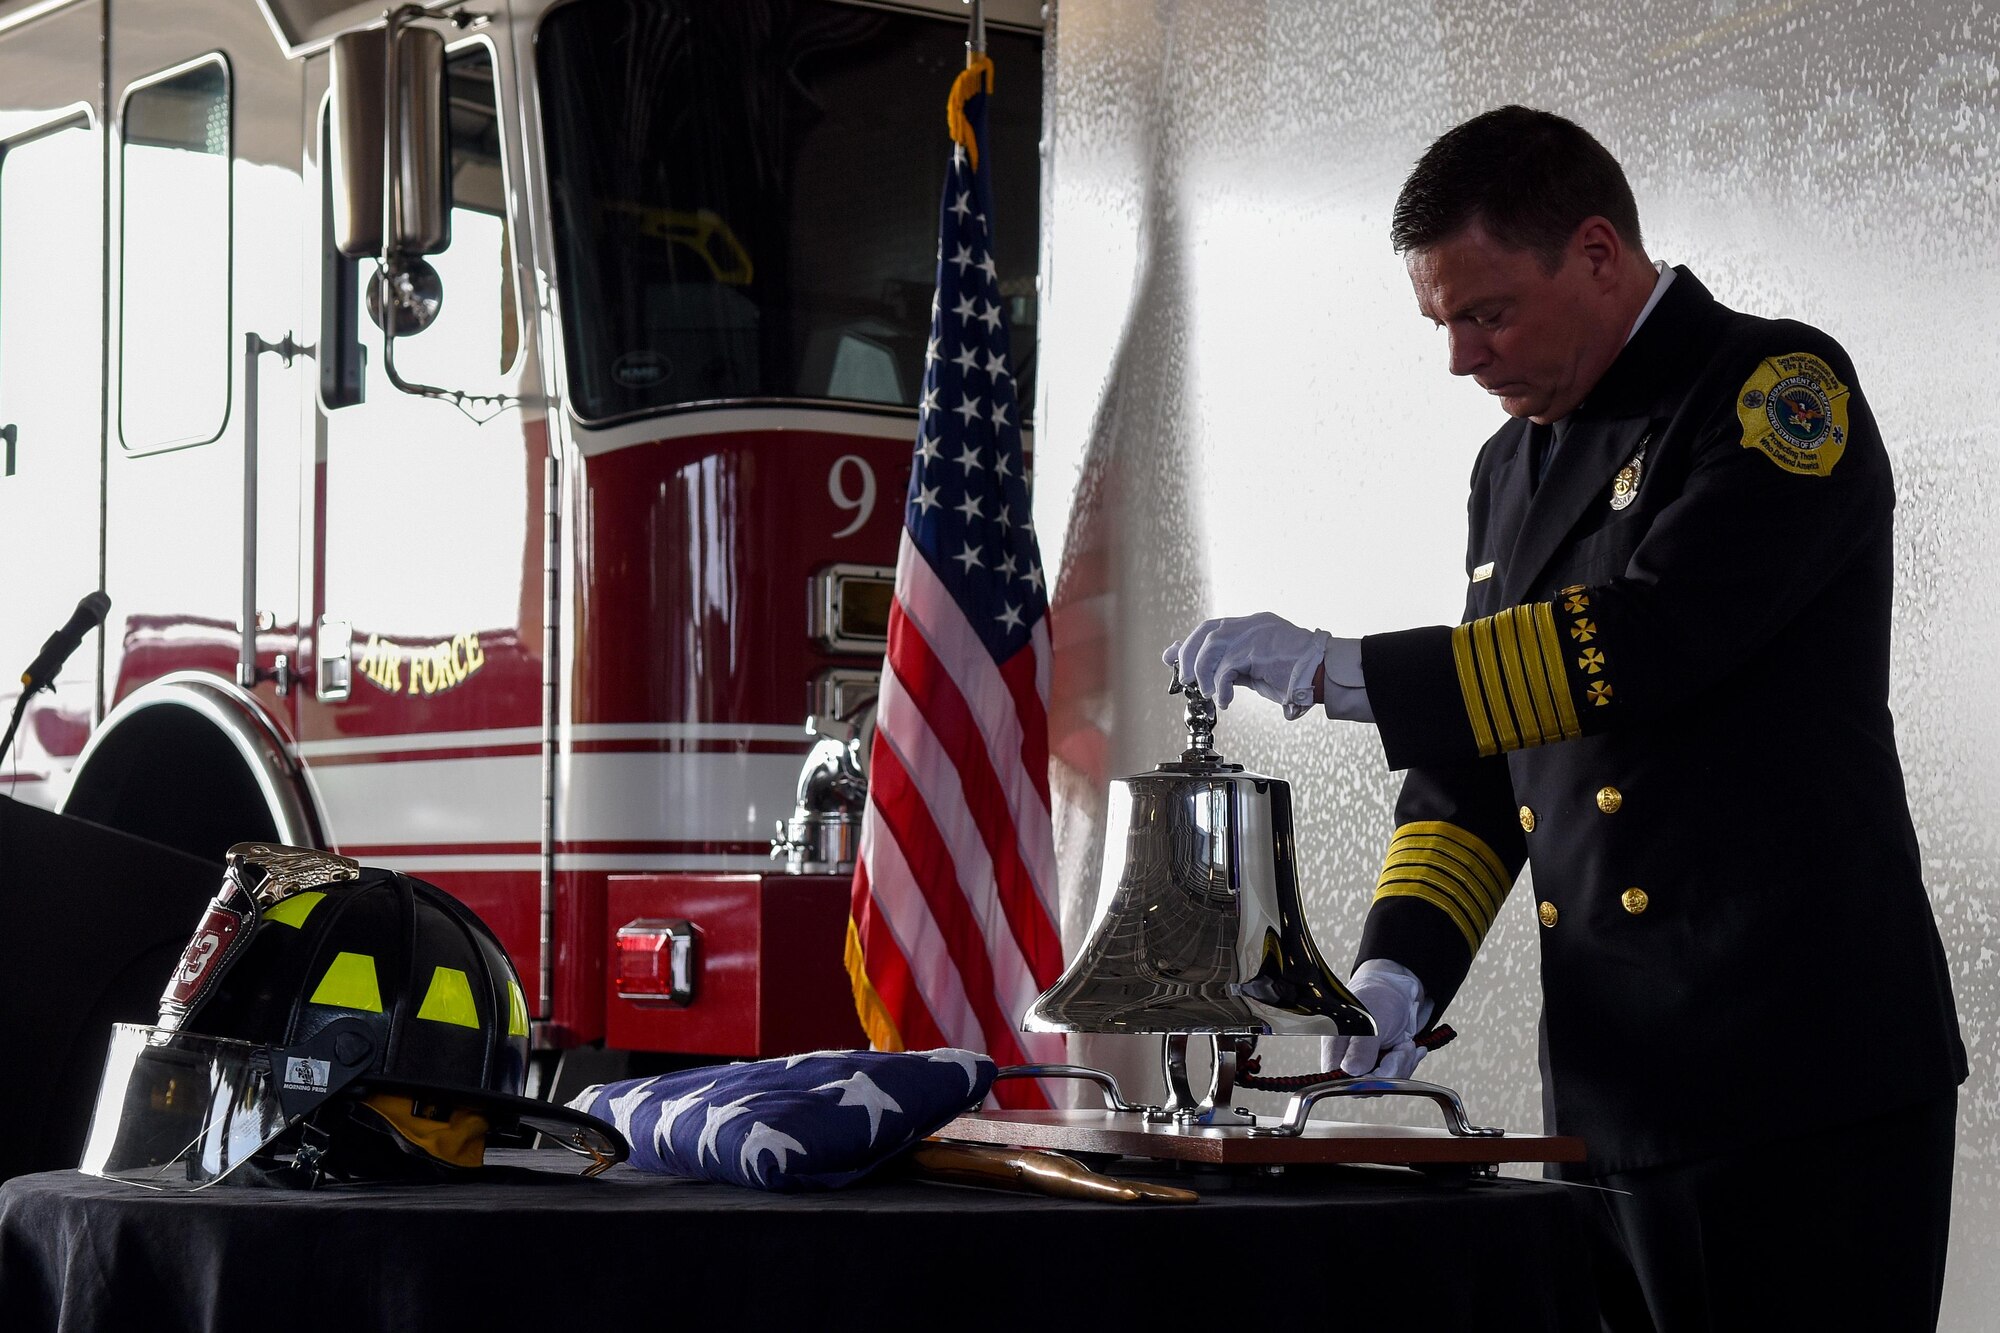 Sean Quinby, 4th Civil Engineer Squadron fire chief, rings a bell during the 9/11 Remembrance ceremony, Sept. 11, 2016, at Seymour Johnson Air Force Base, North Carolina. Quinby rang the bell nine times, signifying the end of duty for the first responders lost during the attacks on 9/11. (U.S. Air Force photo by Airman Shawna L. Keyes)